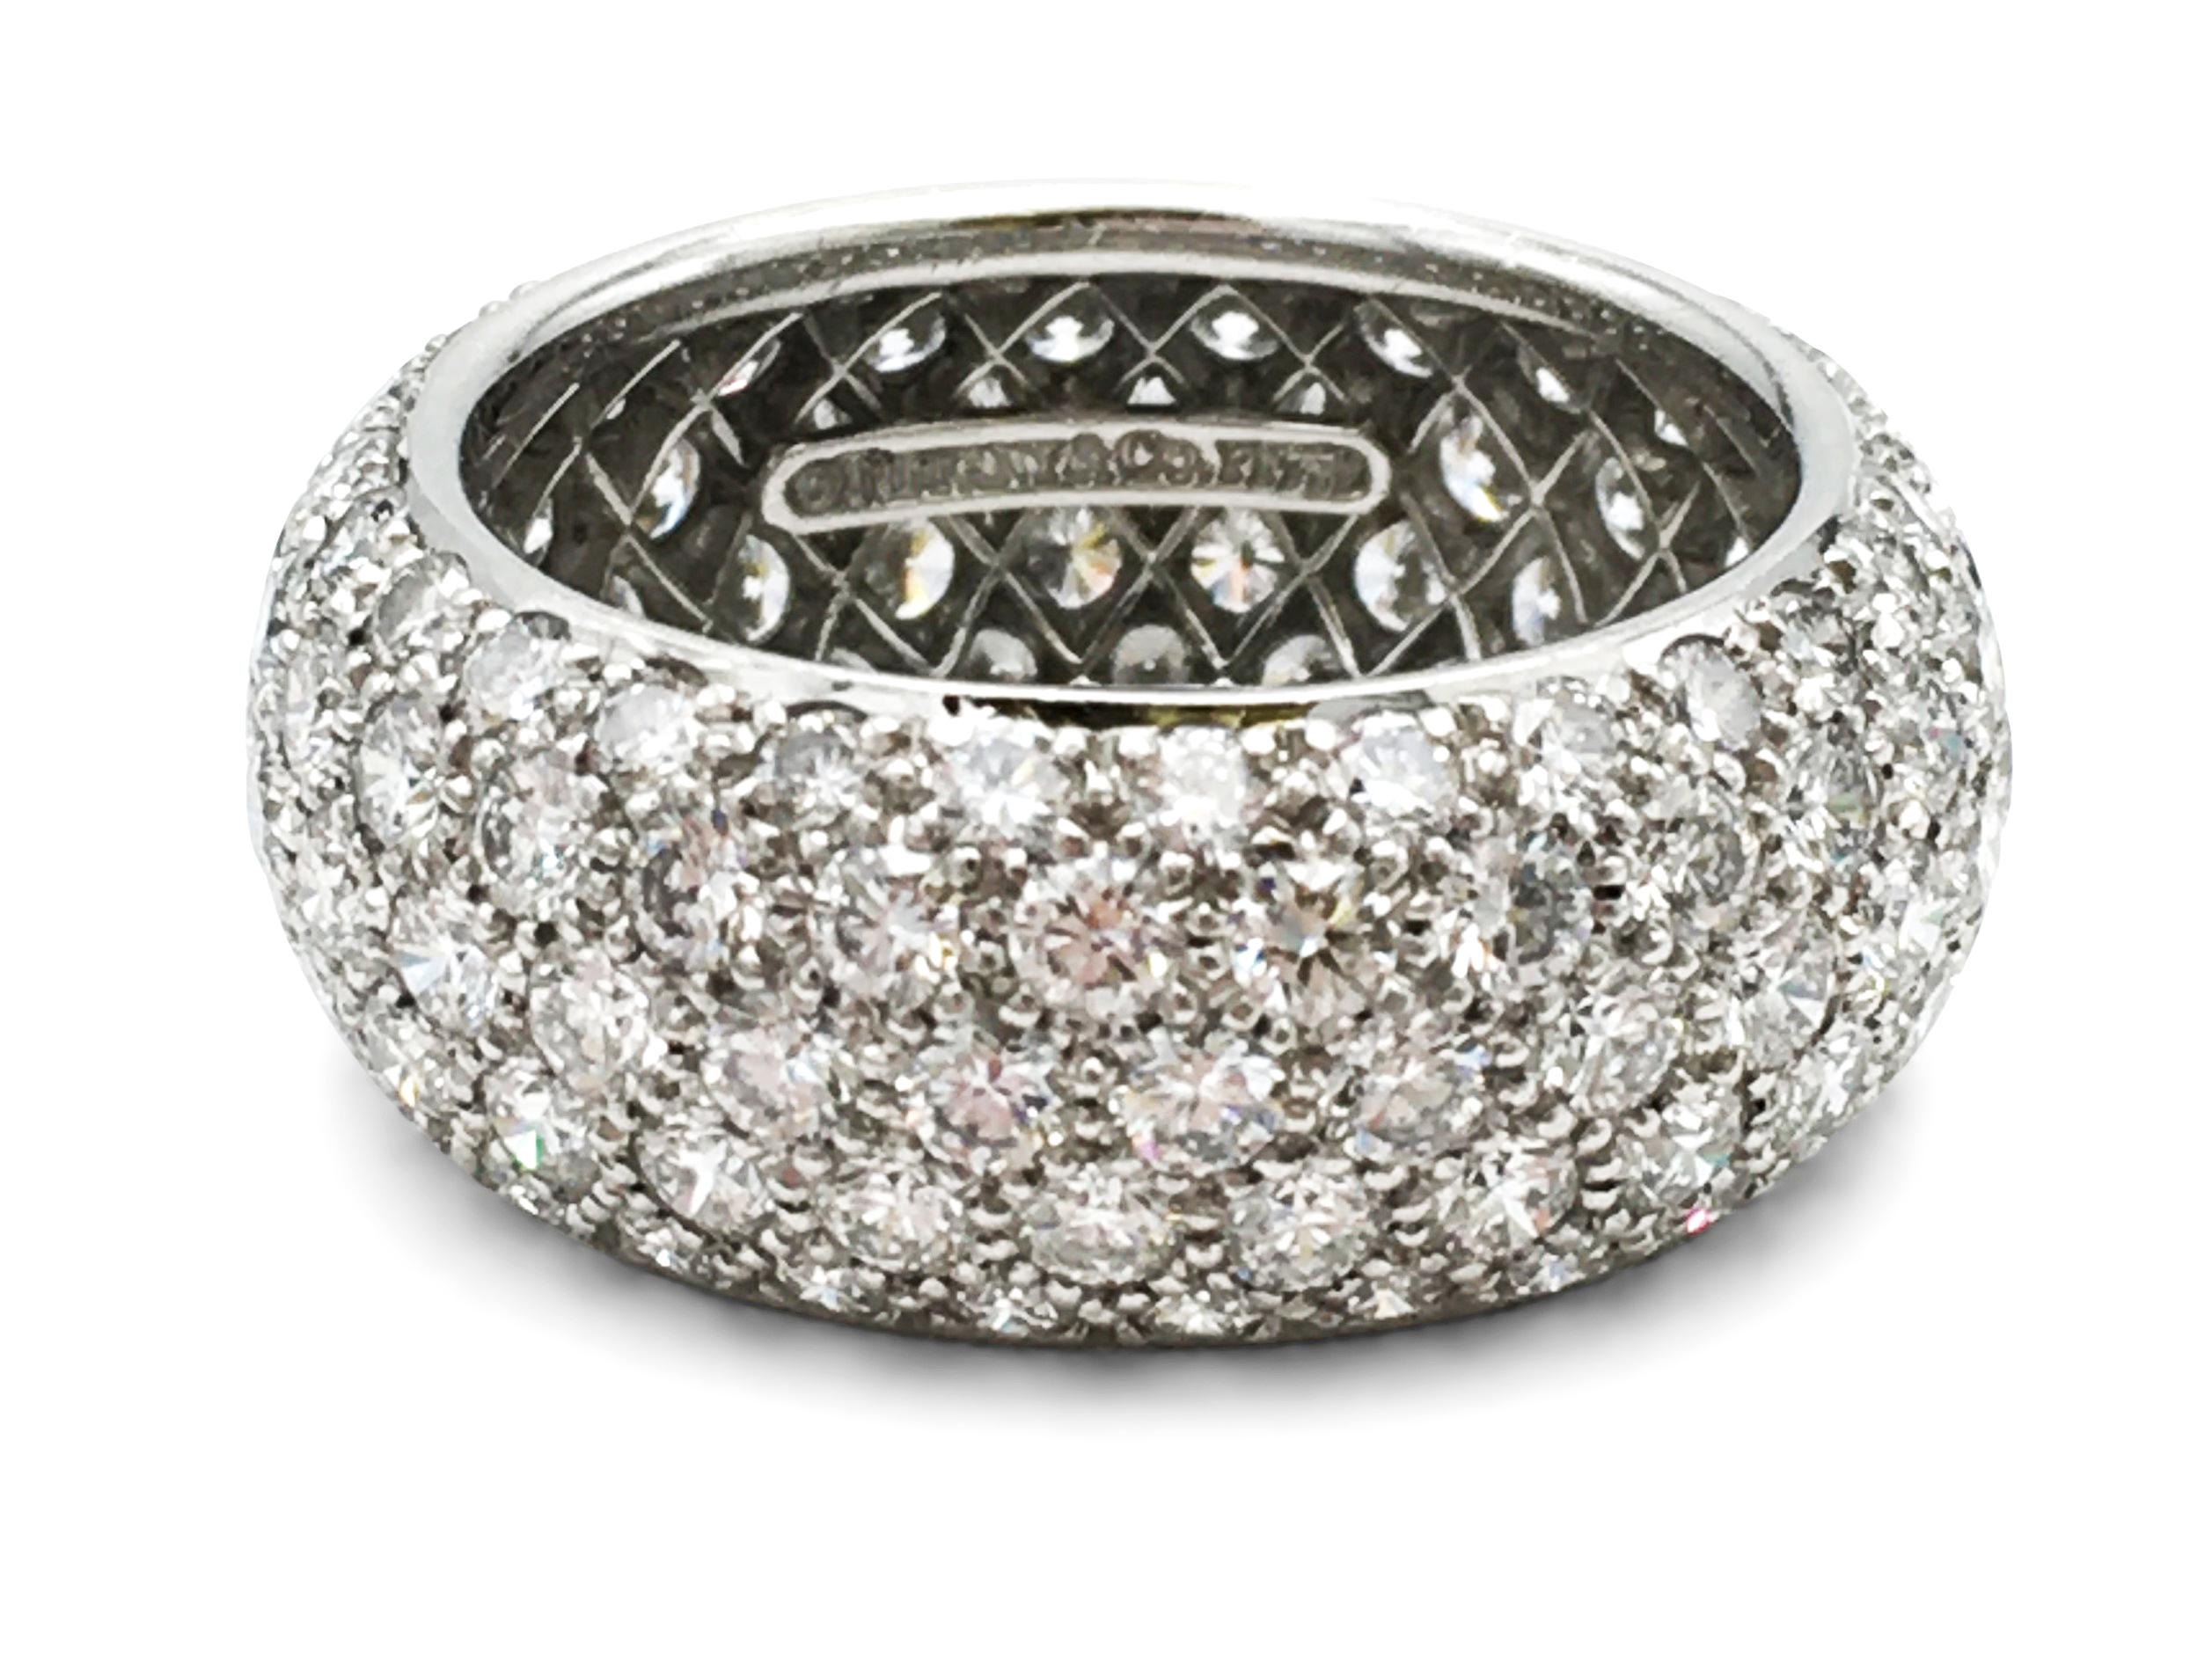 Authentic Tiffany & Co. 'Etoile' five-row band ring crafted in platinum and set with an estimated 3.30 carats of high-quality round brilliant cut diamonds. Ring size 5. Signed Tiffany & Co., PT950. The ring is not presented with original papers or